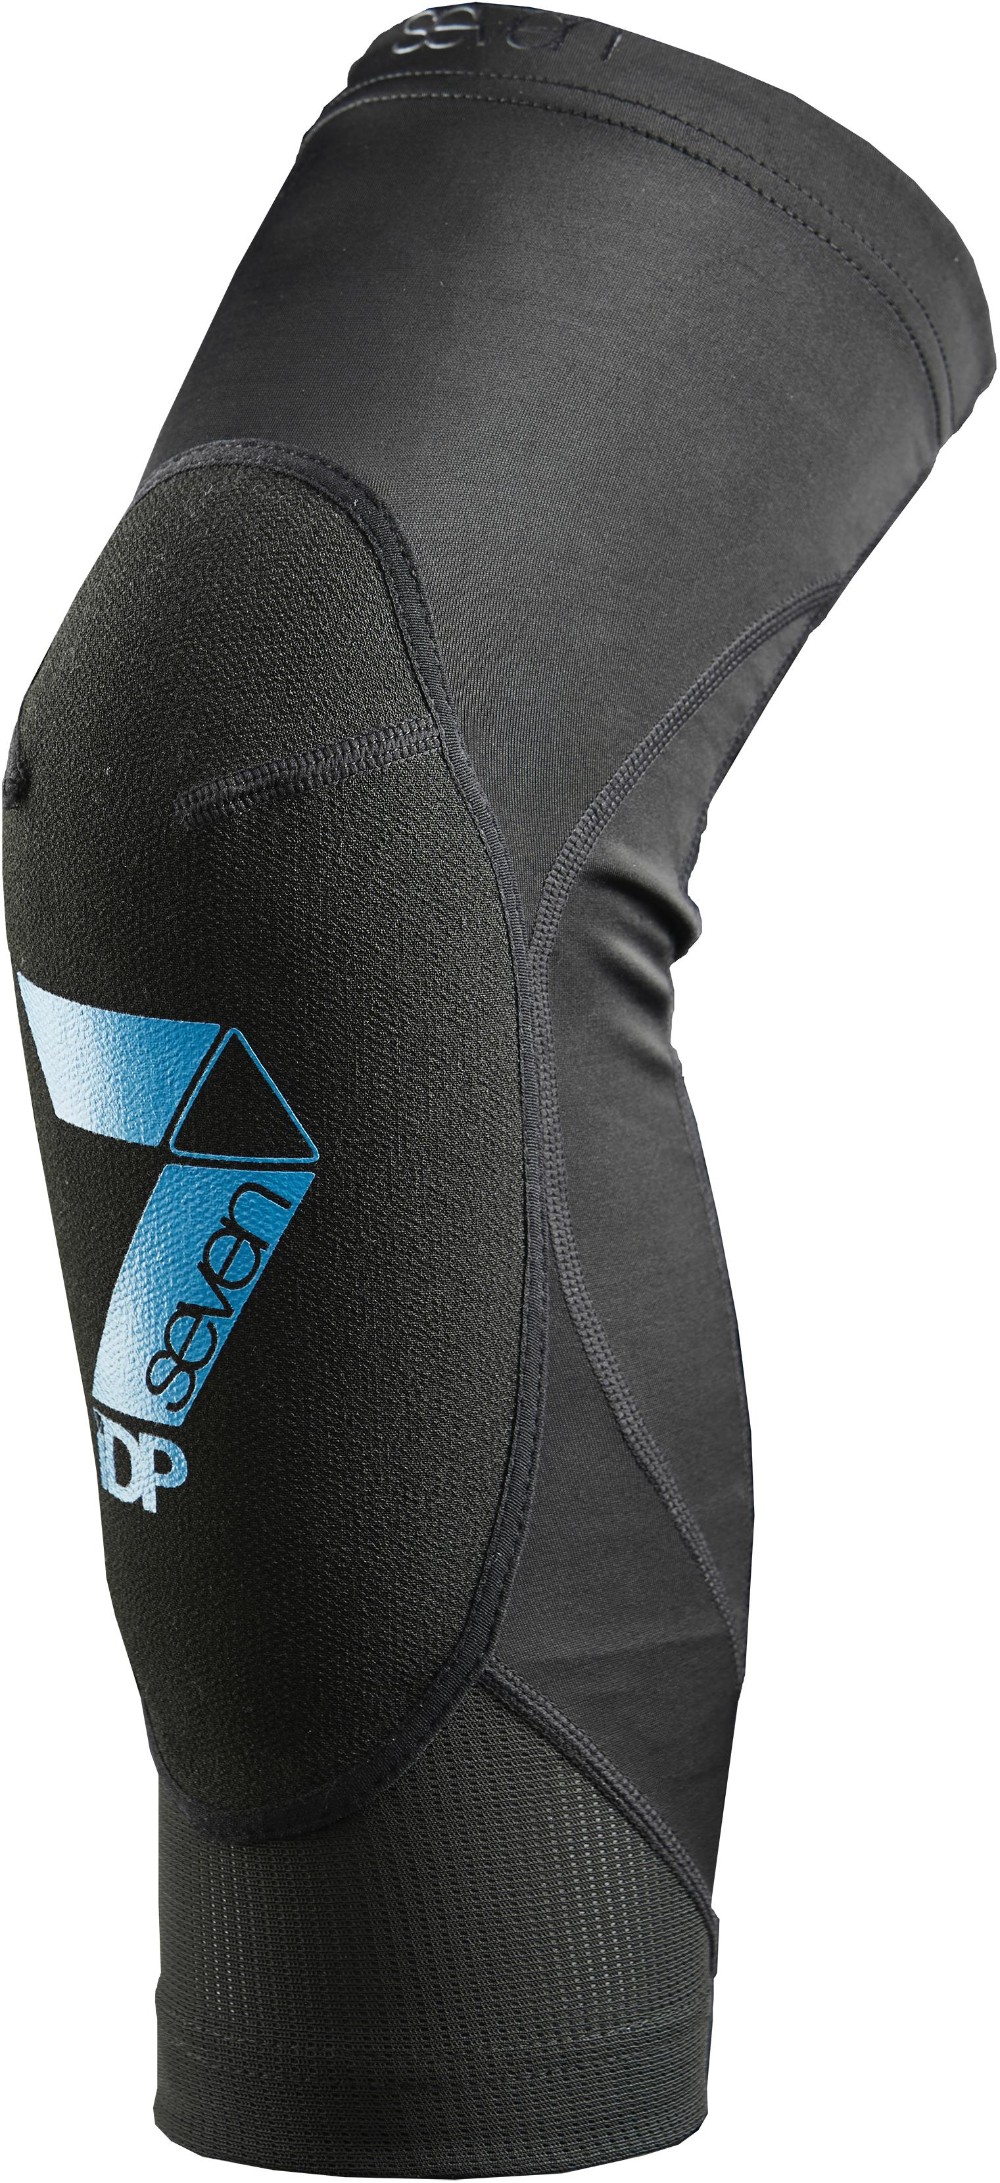 Transition Elbow Pads image 0